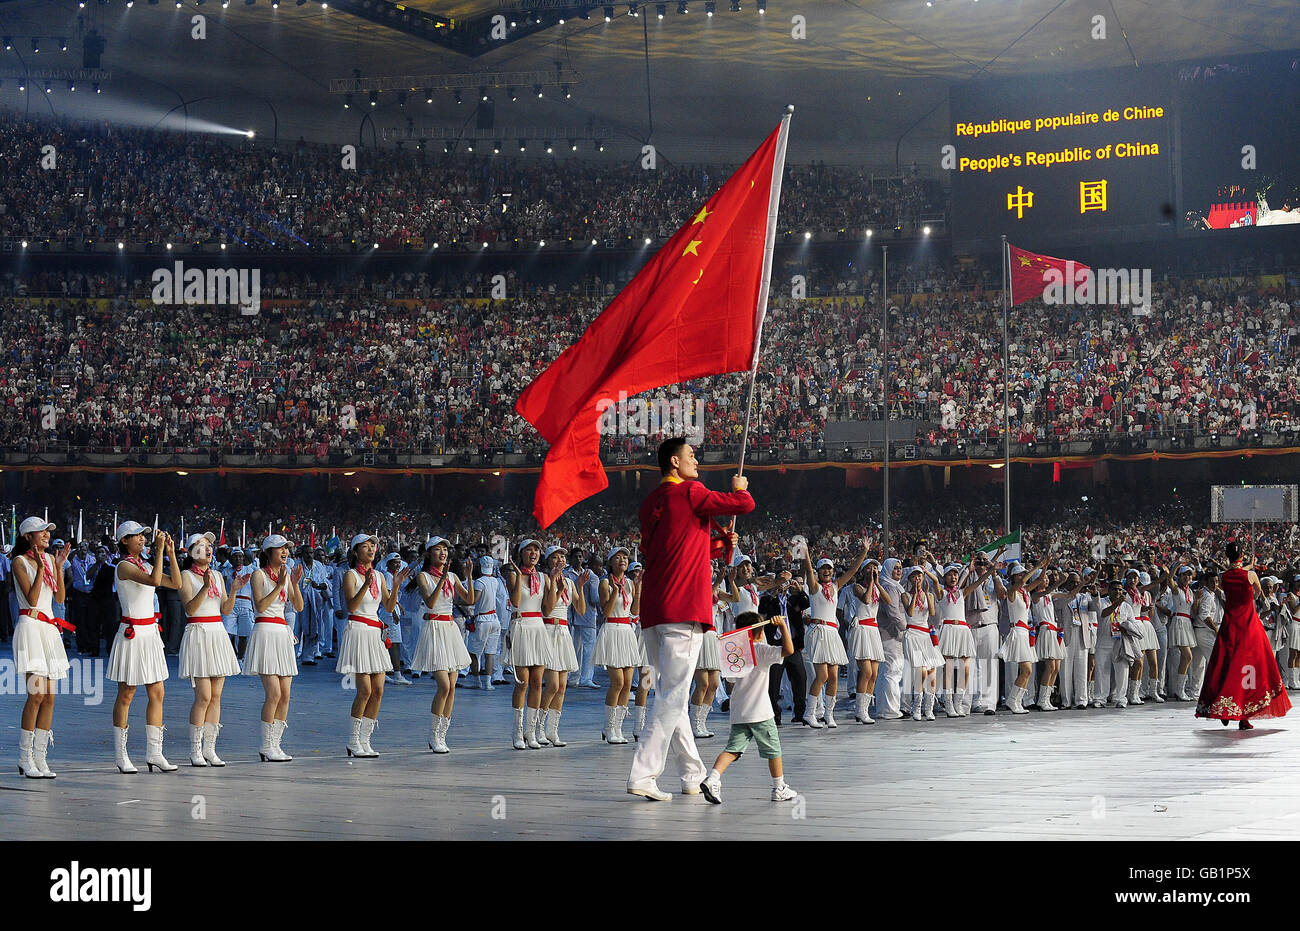 People's Republic of China Flag Carrier and Basketball player Yao Ming with his son during the Beijing Olympic Games 2008 Opening Ceremony at the National Stadium in Beijing, China. Stock Photo